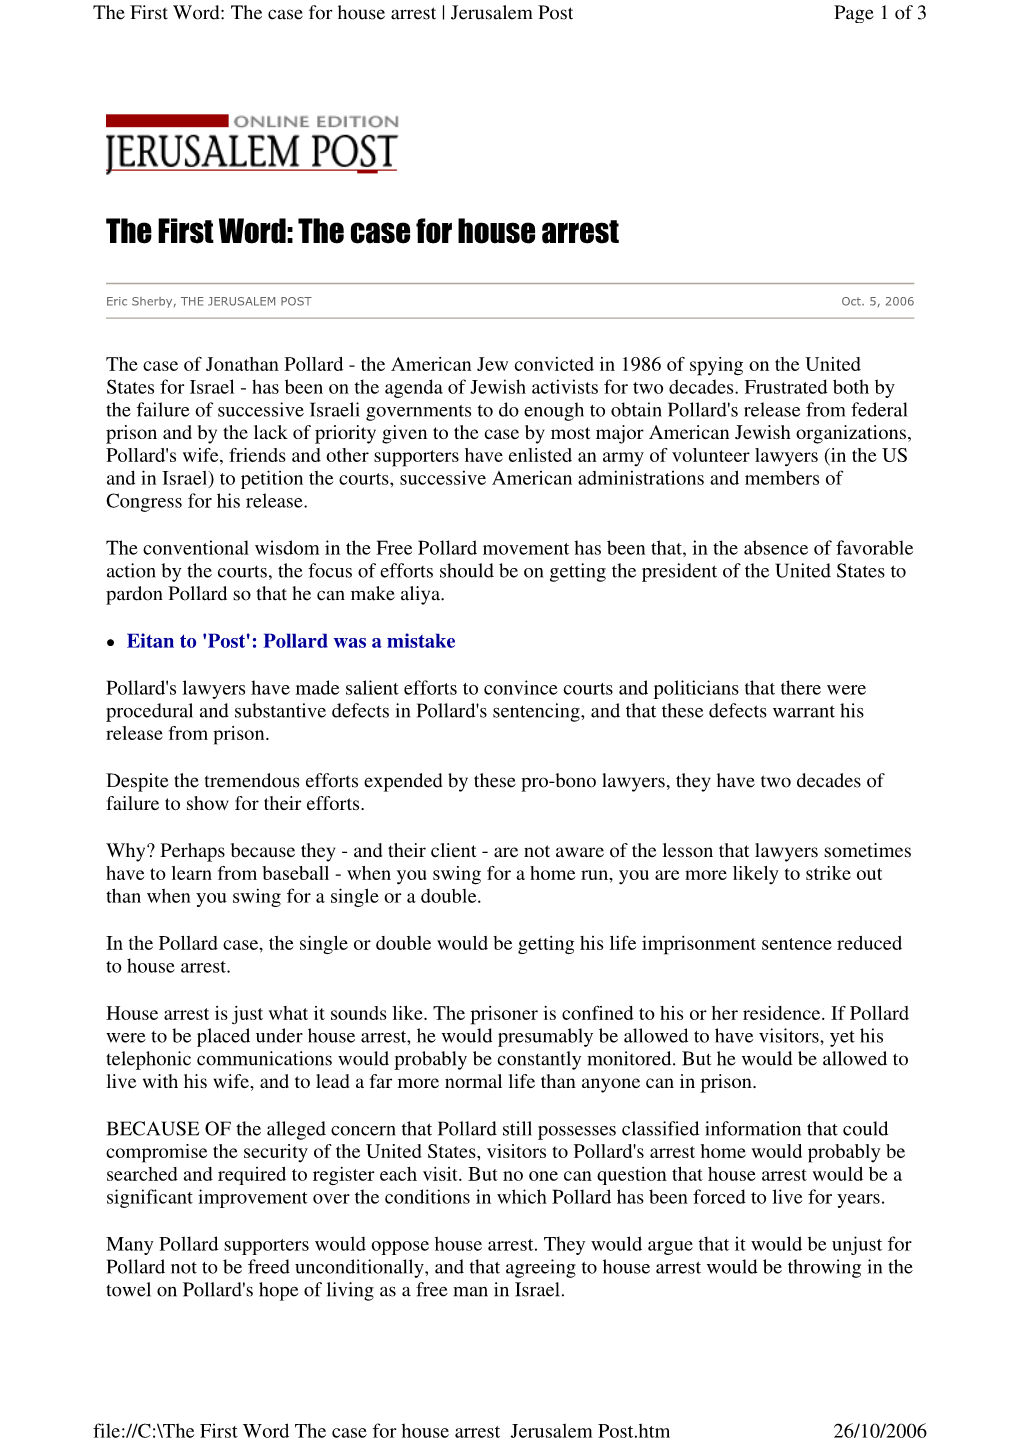 The First Word: the Case for House Arrest | Jerusalem Post Page 1 of 3